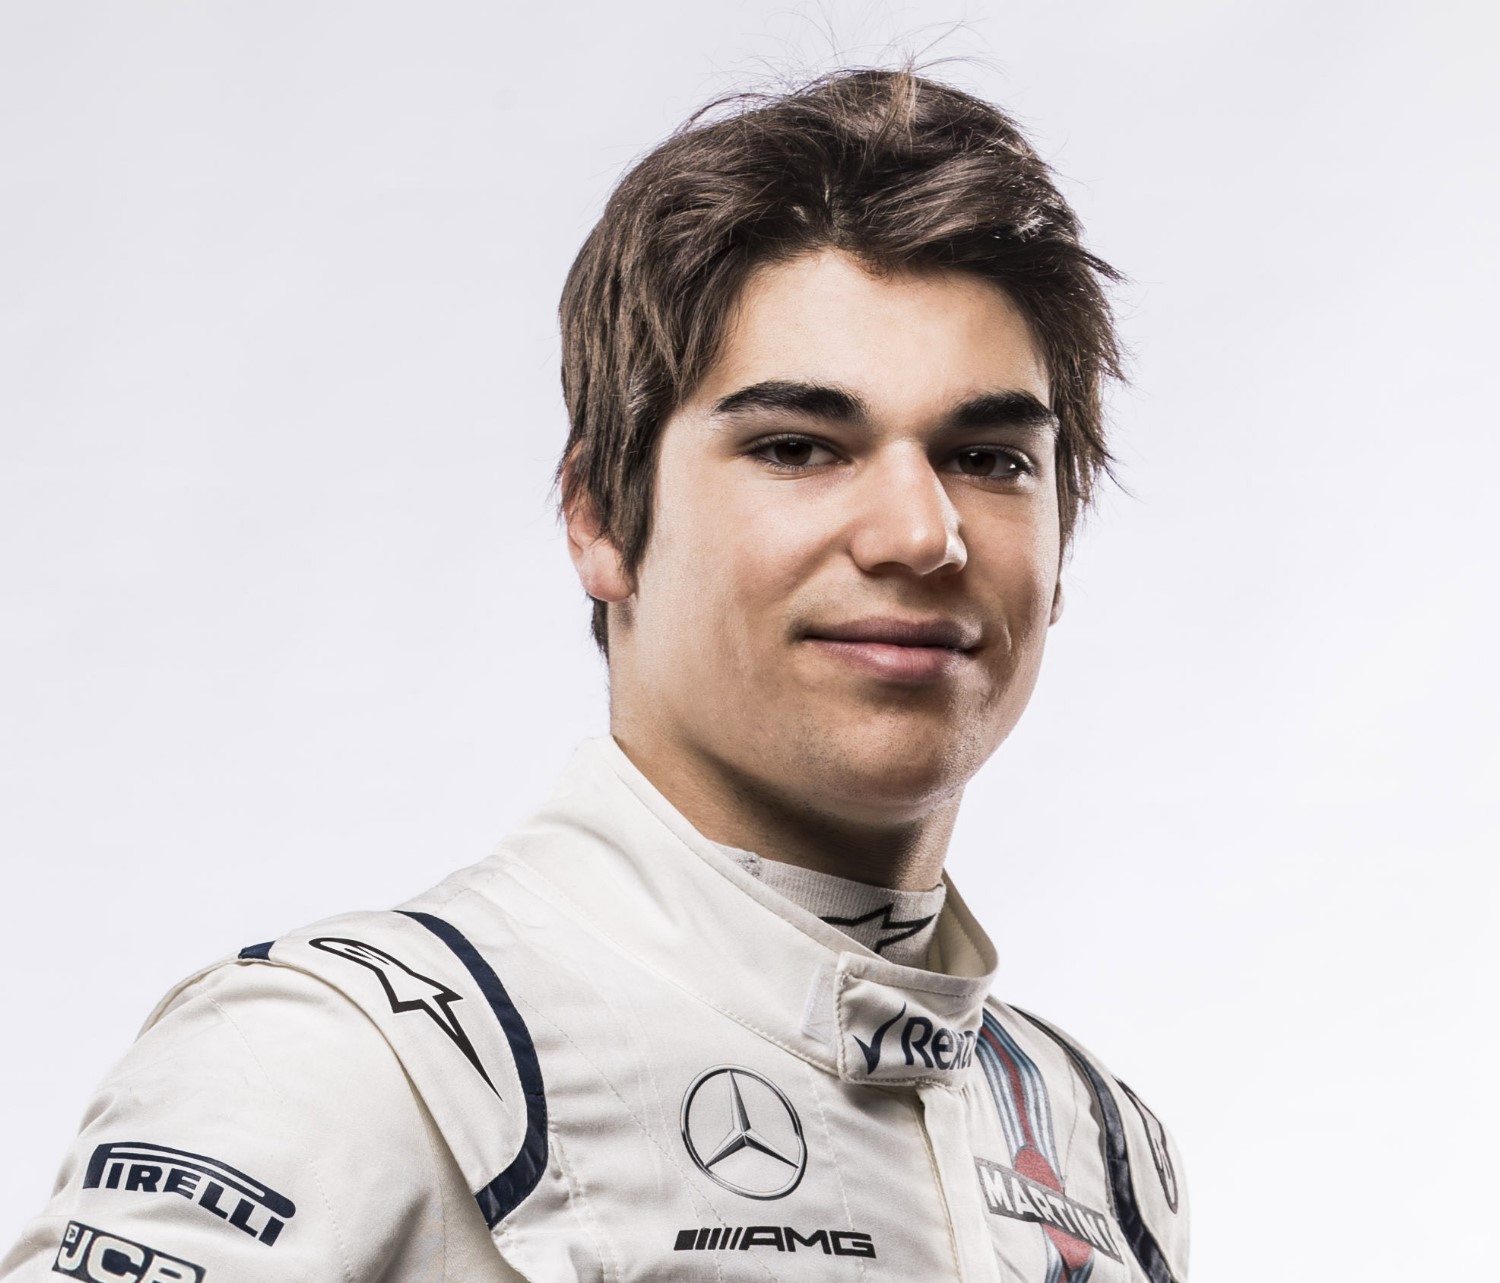 Lance Stroll syas everything needs fixing on the lemon Paddy Lowe designed. The car is 4/10ths sec slower than last year while everyone else is much faster.